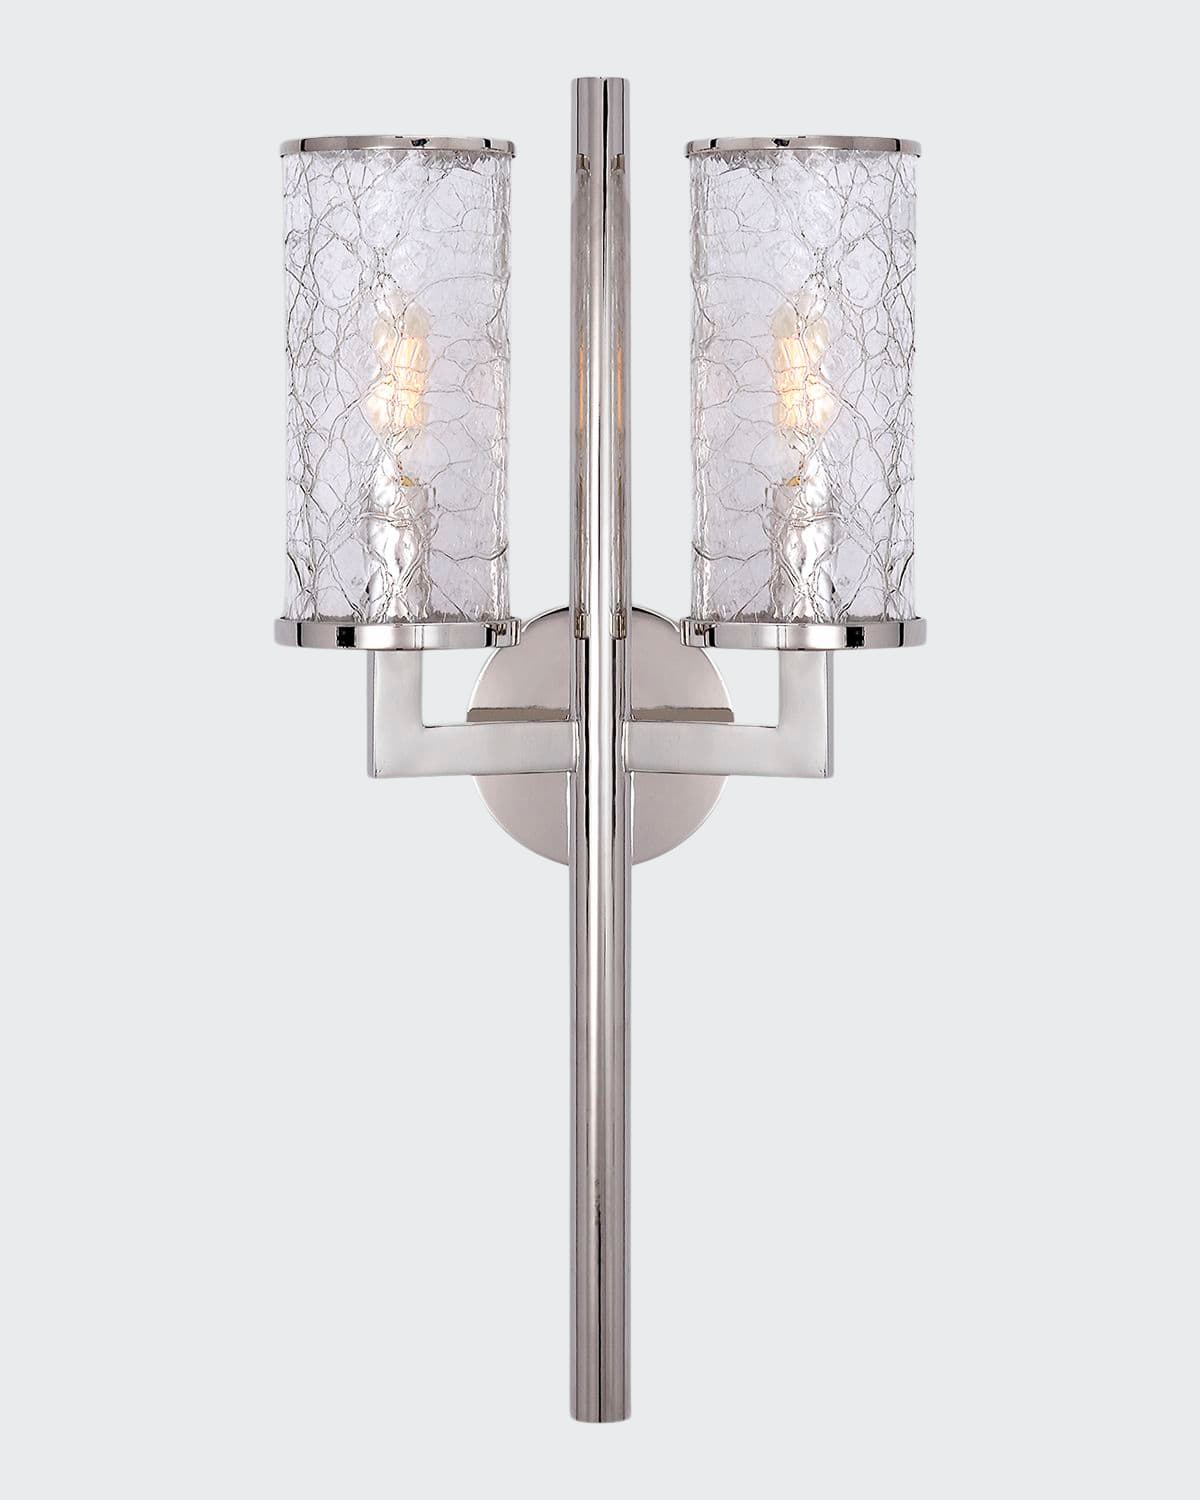 Kelly Wearstler For Visual Comfort Signature Liaison Double Sconce In Polished Nickel